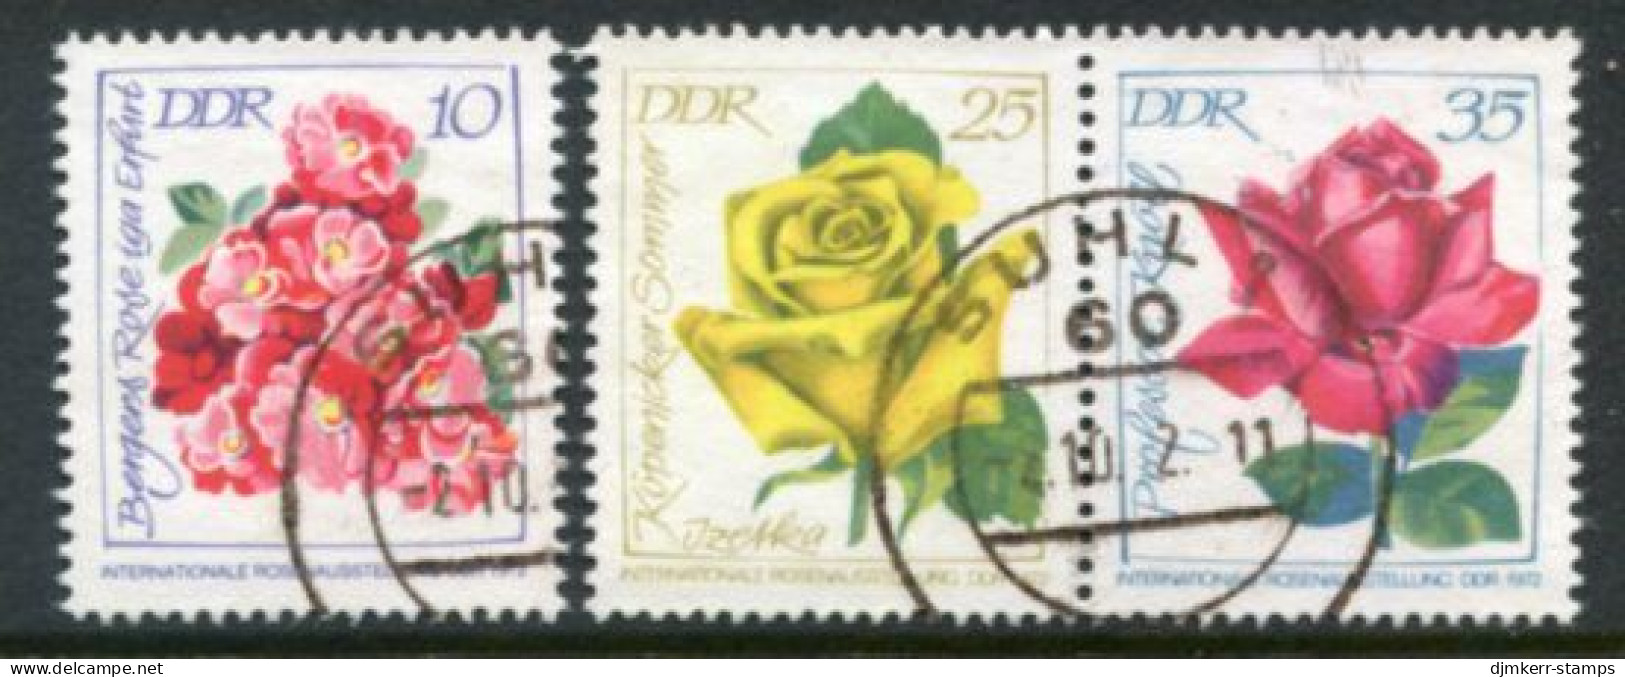 DDR / E. GERMANY 1972 Rose Exhibition II Used*.  Michel 1778-80 - Oblitérés